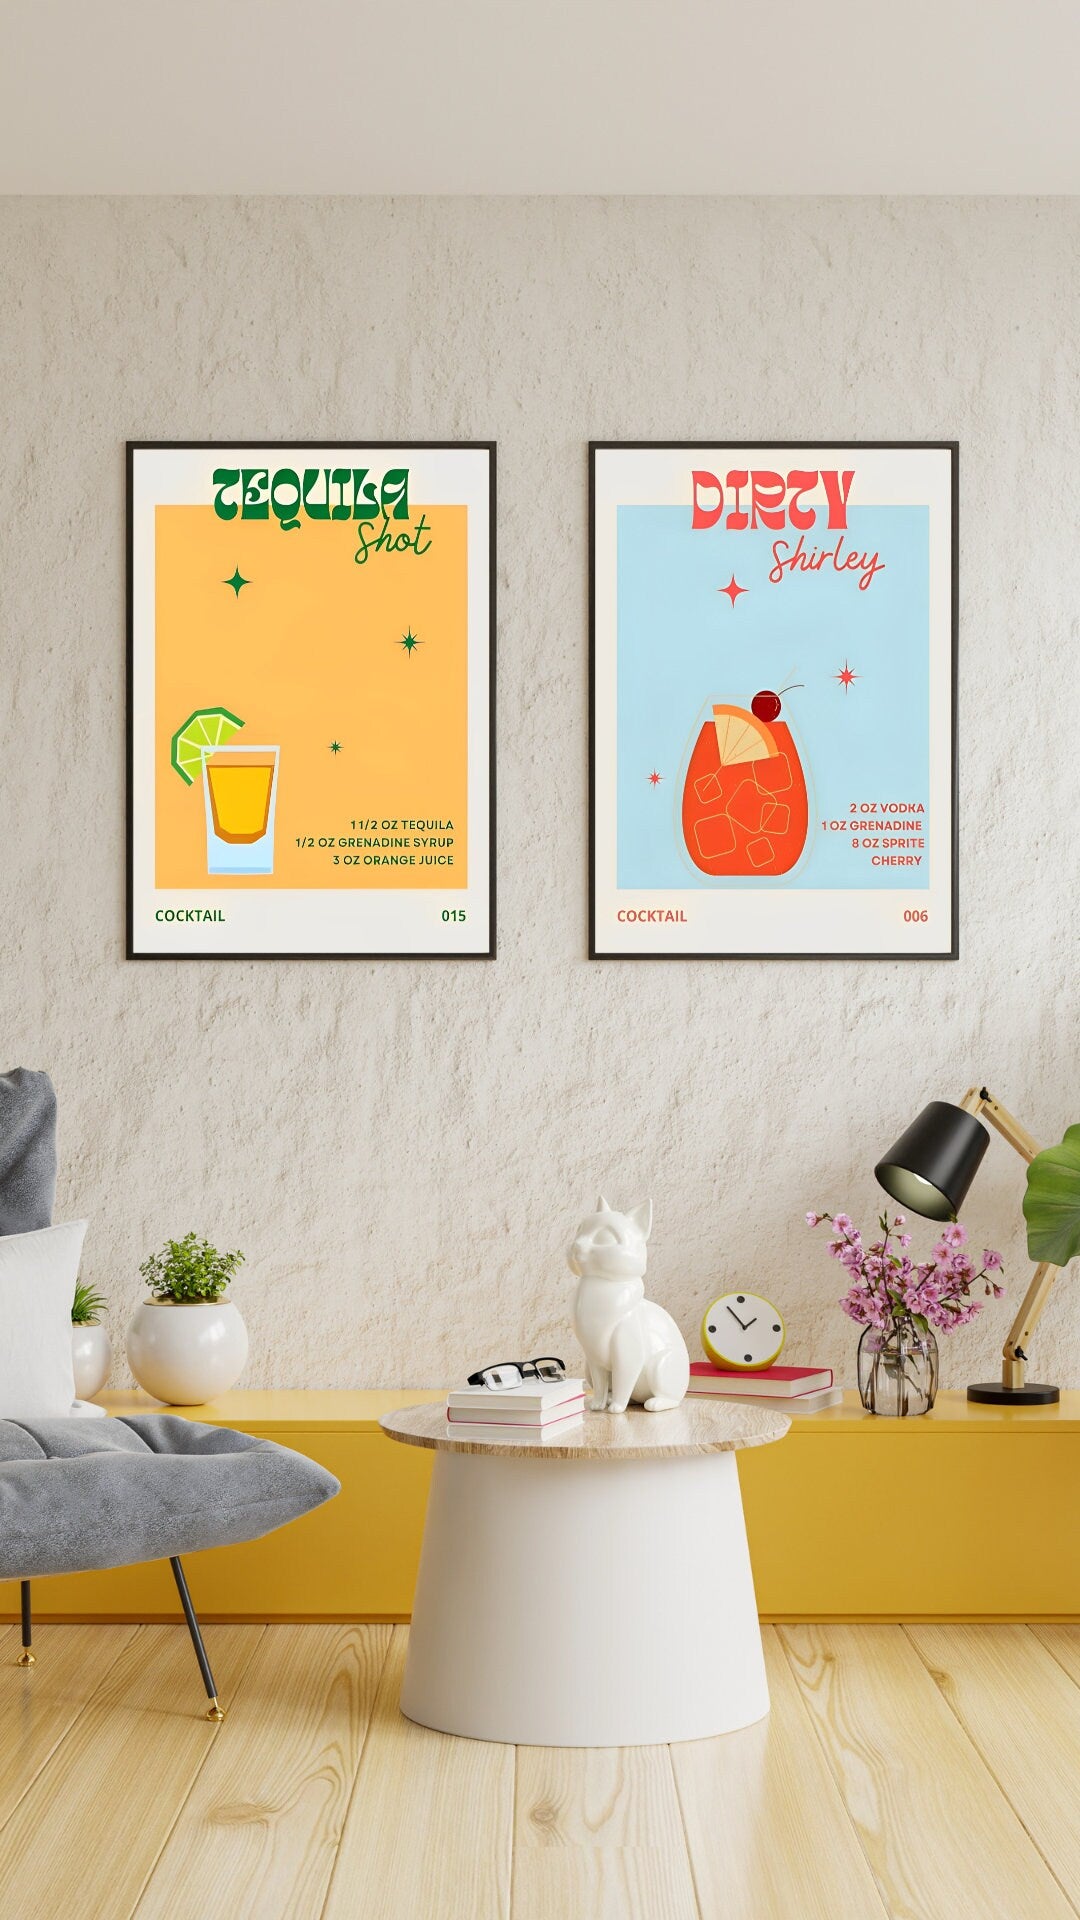 Colorful Cocktail Prints With Recipes Set of 3 INSTANT DOWNLOAD, Tequila Dirty Shirley Moscow Mule, Preppy Room Decor, Trendy Wall Art Retro